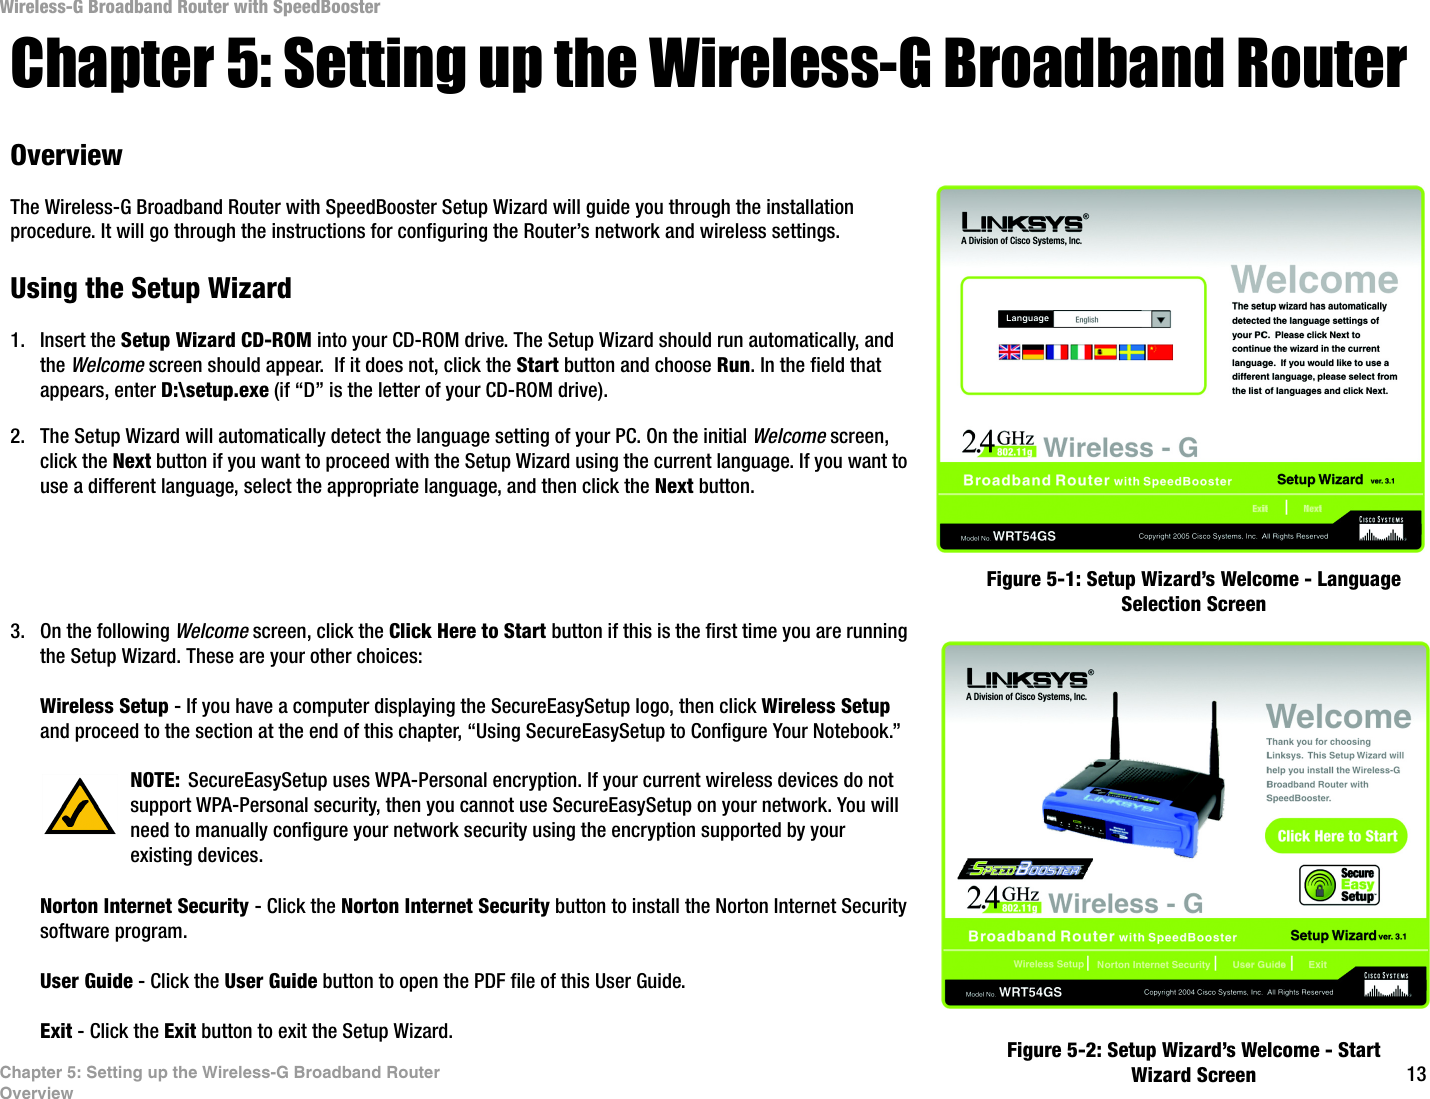 13Chapter 5: Setting up the Wireless-G Broadband RouterOverviewWireless-G Broadband Router with SpeedBoosterChapter 5: Setting up the Wireless-G Broadband RouterOverviewThe Wireless-G Broadband Router with SpeedBooster Setup Wizard will guide you through the installation procedure. It will go through the instructions for configuring the Router’s network and wireless settings.Using the Setup Wizard1. Insert the Setup Wizard CD-ROM into your CD-ROM drive. The Setup Wizard should run automatically, and the Welcome screen should appear.  If it does not, click the Start button and choose Run. In the field that appears, enter D:\setup.exe (if “D” is the letter of your CD-ROM drive).2. The Setup Wizard will automatically detect the language setting of your PC. On the initial Welcome screen, click the Next button if you want to proceed with the Setup Wizard using the current language. If you want to use a different language, select the appropriate language, and then click the Next button.3. On the following Welcome screen, click the Click Here to Start button if this is the first time you are running the Setup Wizard. These are your other choices:Wireless Setup - If you have a computer displaying the SecureEasySetup logo, then click Wireless Setup and proceed to the section at the end of this chapter, “Using SecureEasySetup to Configure Your Notebook.”Norton Internet Security - Click the Norton Internet Security button to install the Norton Internet Security software program. User Guide - Click the User Guide button to open the PDF file of this User Guide.Exit - Click the Exit button to exit the Setup Wizard.Figure 5-1: Setup Wizard’s Welcome - Language Selection ScreenFigure 5-2: Setup Wizard’s Welcome - Start Wizard ScreenNOTE: SecureEasySetup uses WPA-Personal encryption. If your current wireless devices do not support WPA-Personal security, then you cannot use SecureEasySetup on your network. You will need to manually configure your network security using the encryption supported by your existing devices.